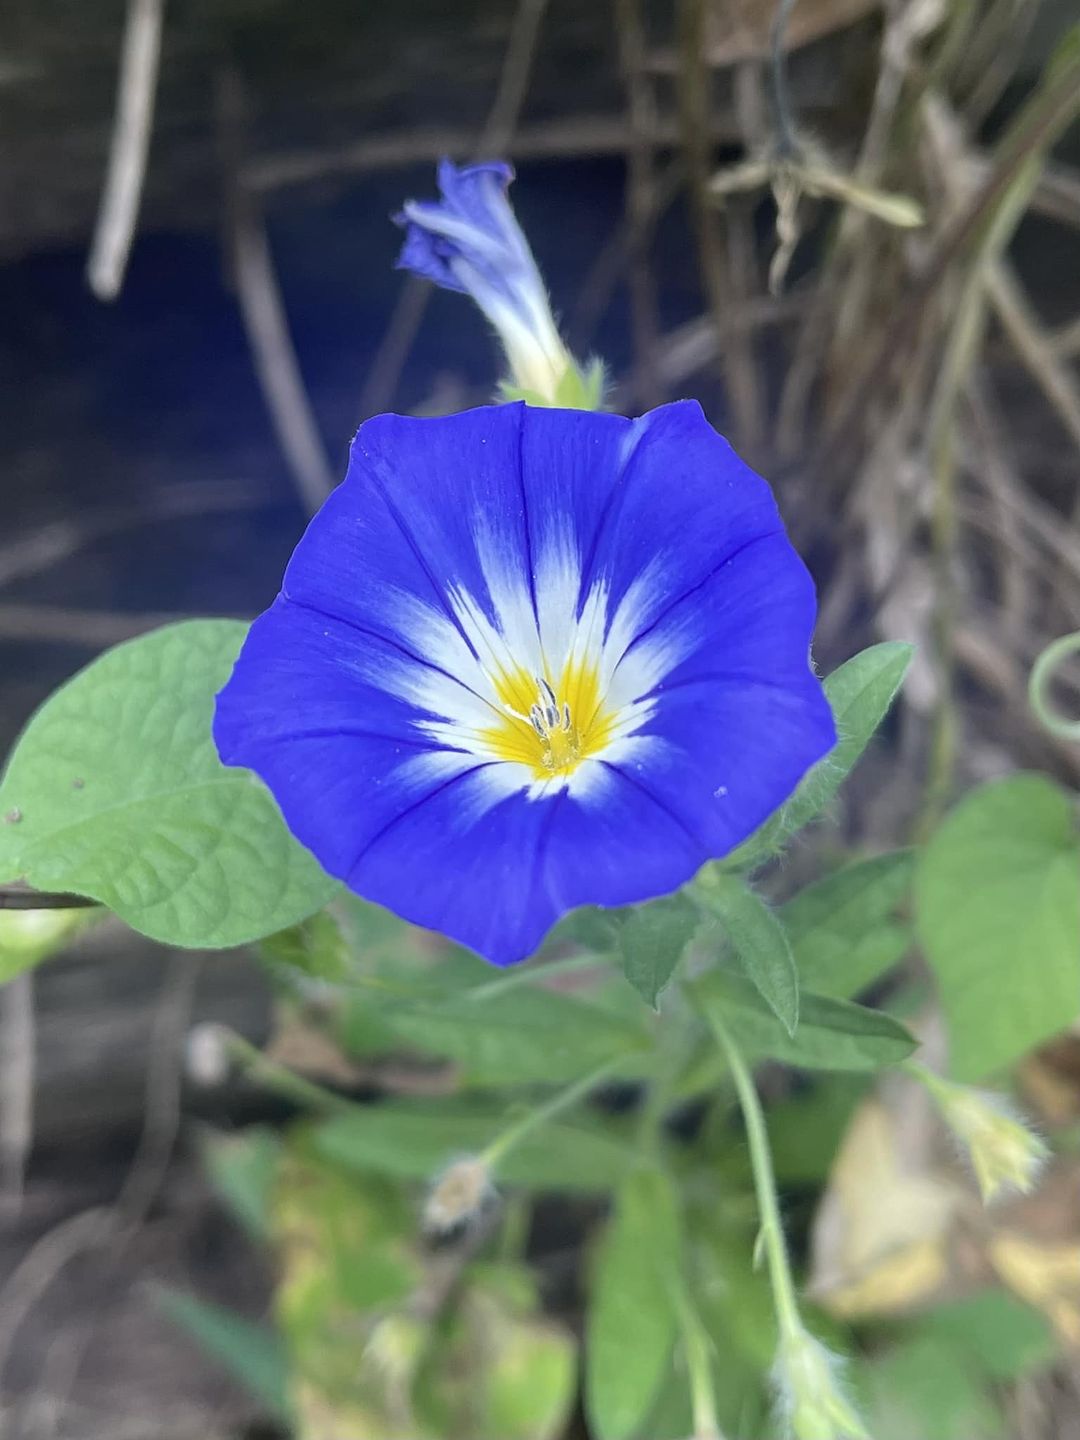 Blue morning glory flower with yellow center blooming in the center of the plant.